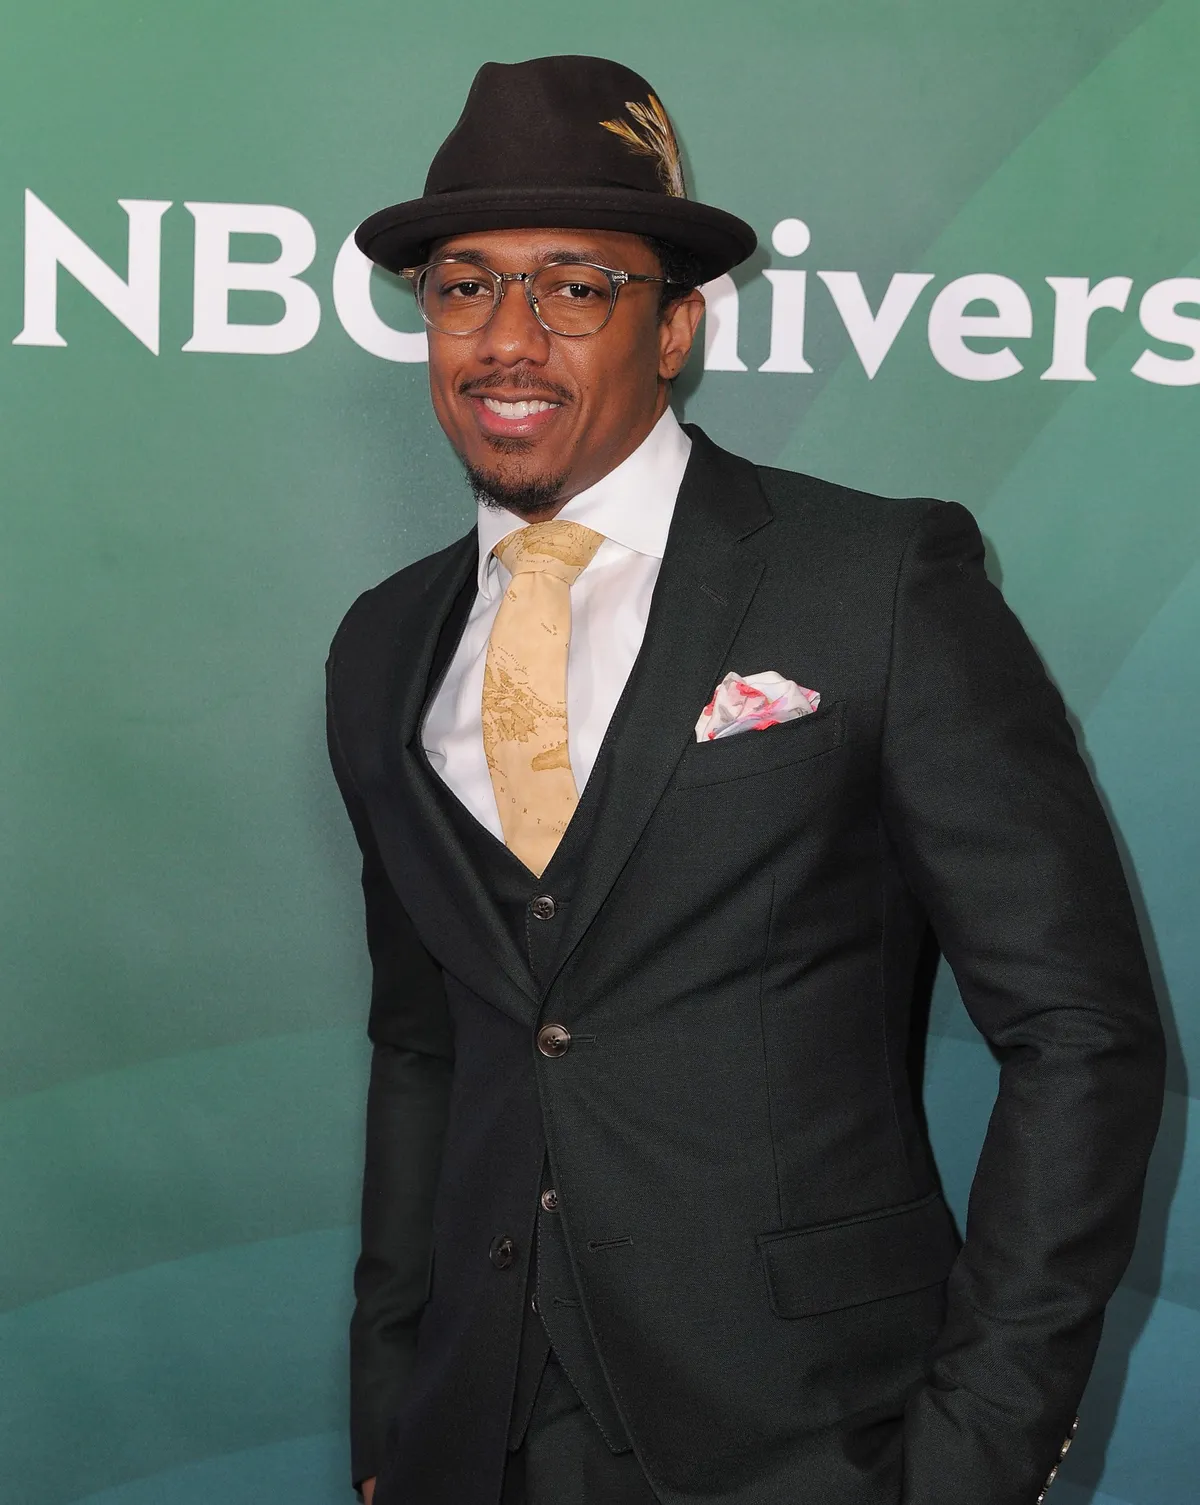 Nick Cannon at the Winter TCA Tour on January 14, 2016. | Photo: Getty Images